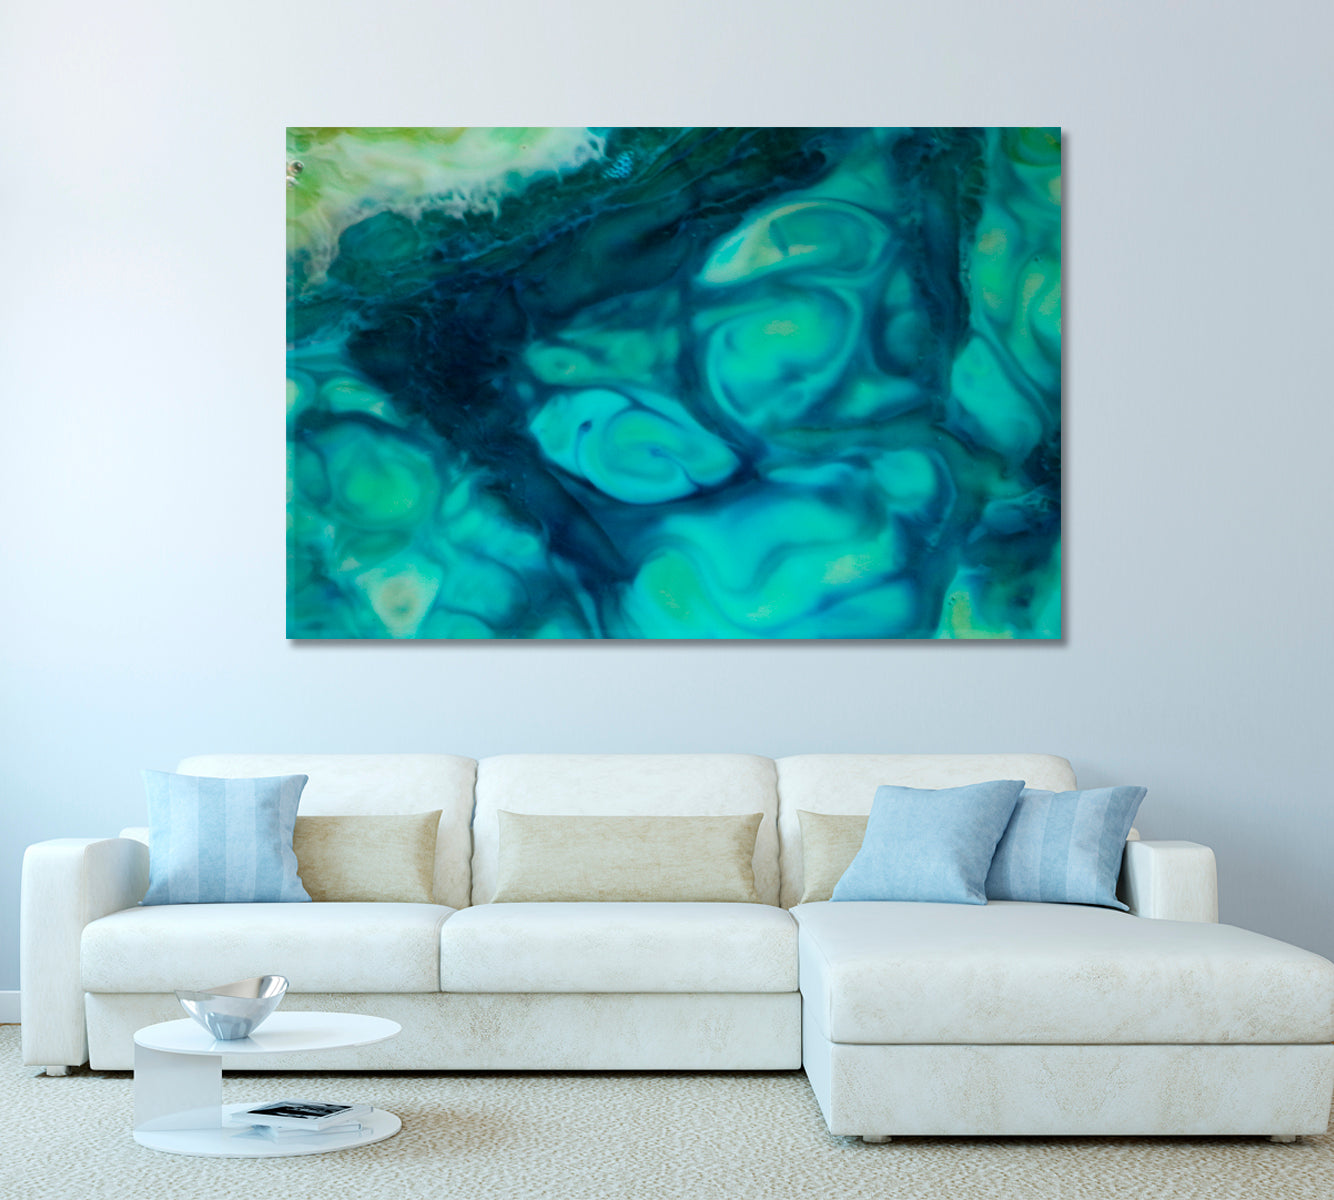 Deep Blue Abstract Fantasy Swirls and Bubbles Canvas Print-Canvas Print-CetArt-1 Panel-24x16 inches-CetArt